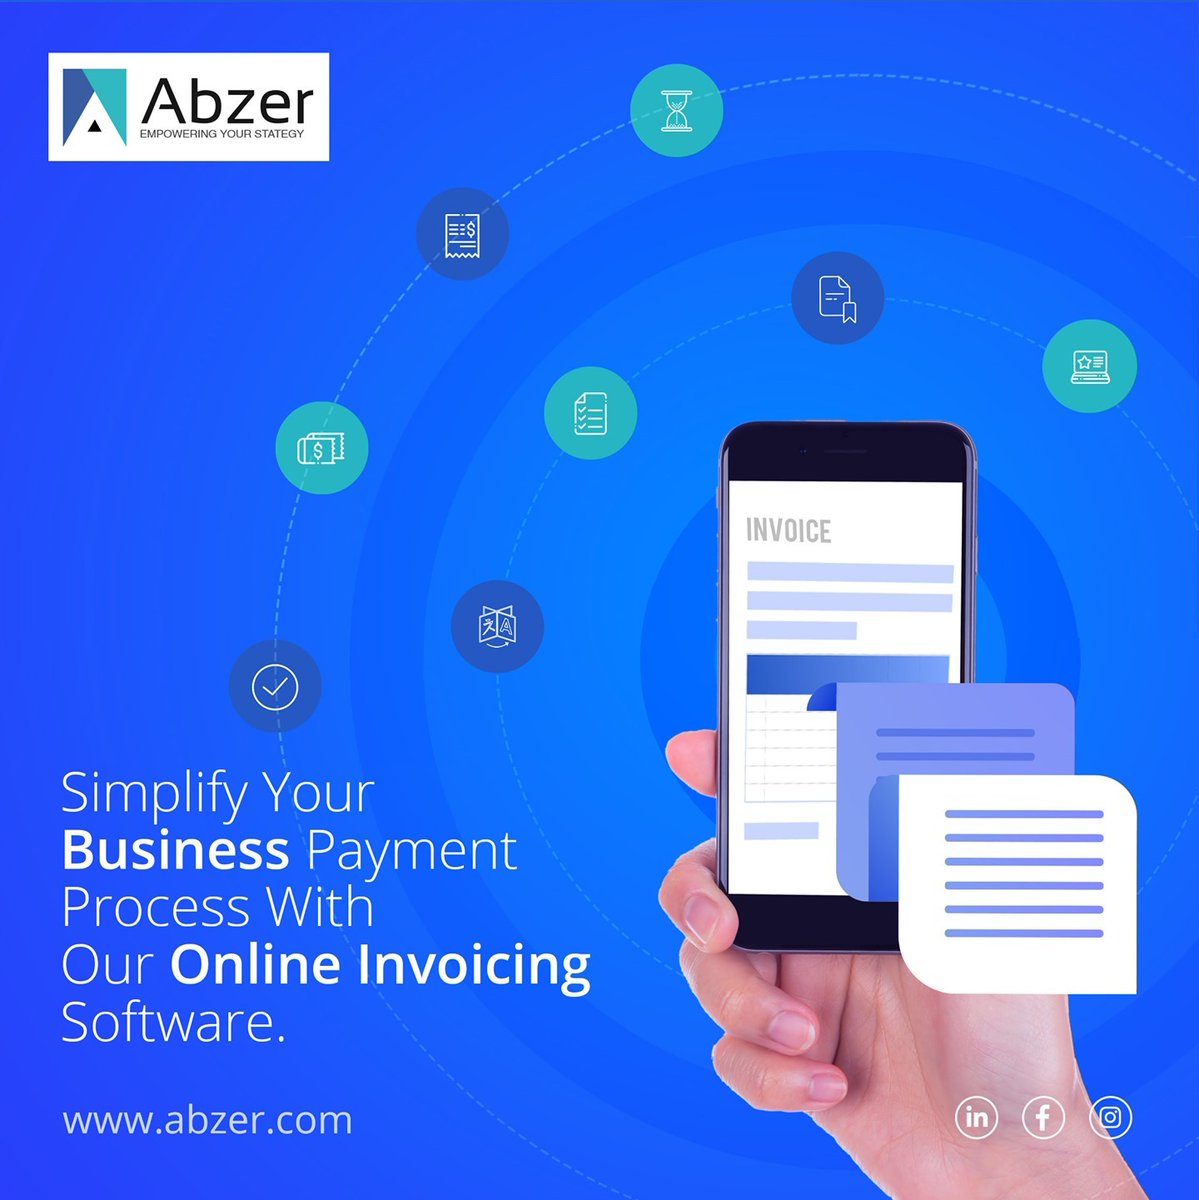 Simplify your business payment process with our online invoicing software. Our online invoicing for your business offers efficient and organized solutions to enhance your brand. 
Get in touch with us right away!
Visit for More Info : smartinvoice.ae
#invoicingsoftware